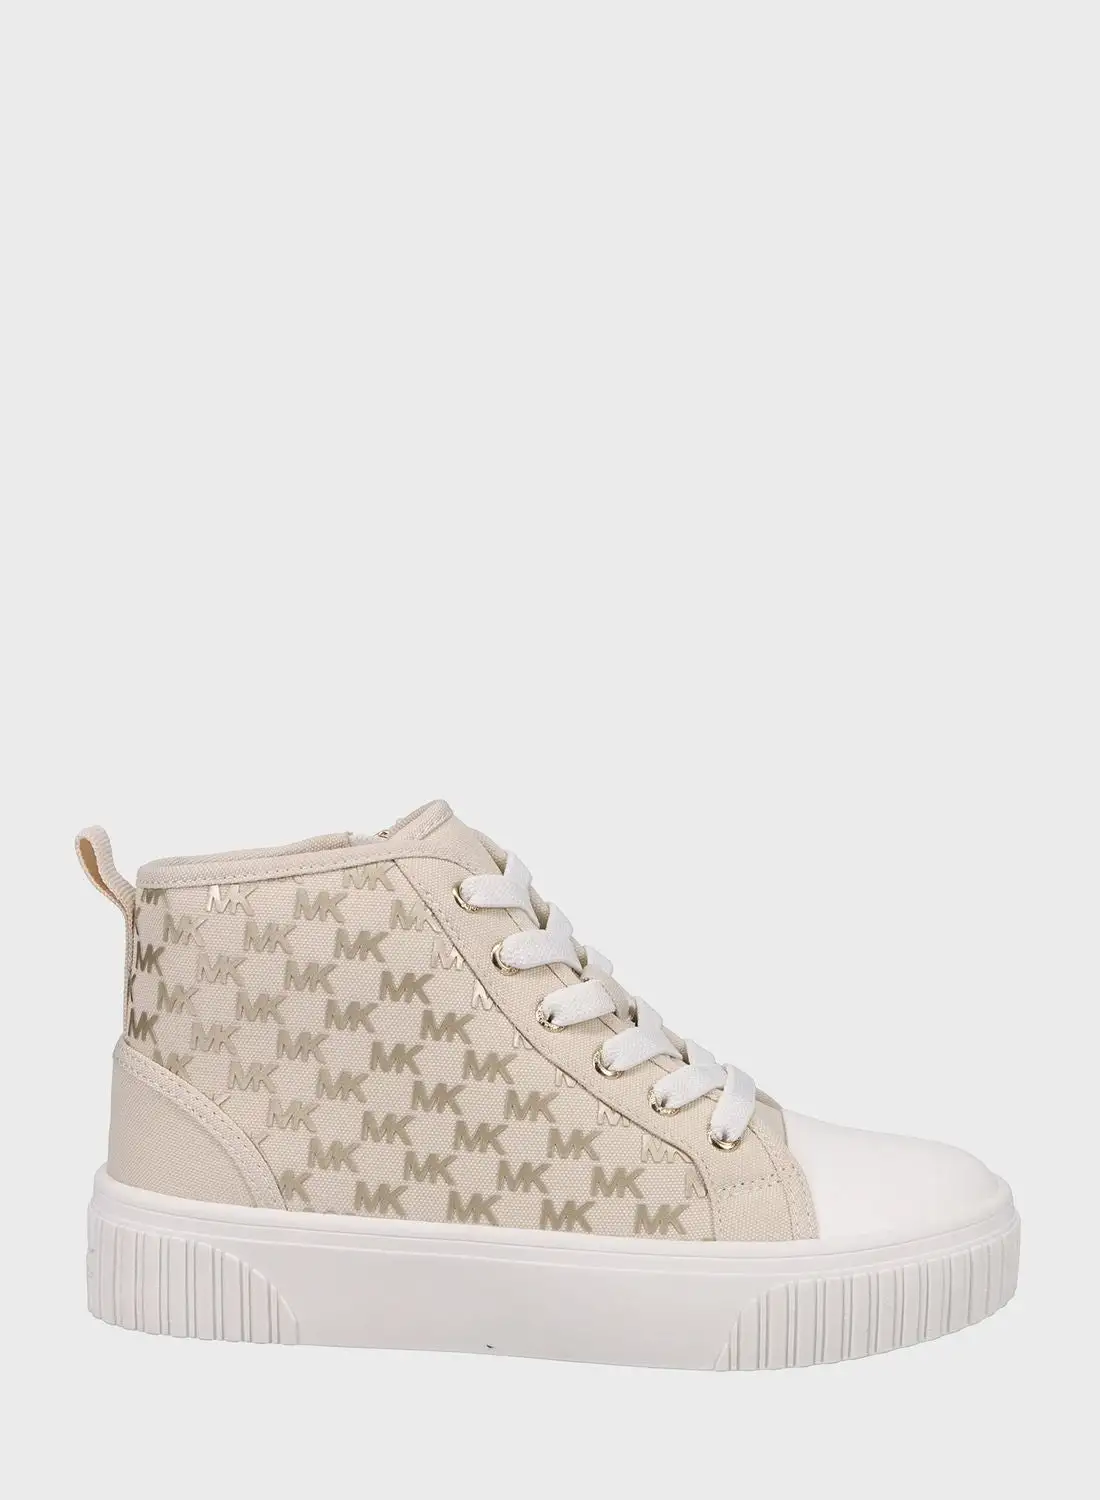 Michael Kors Youth Skate Split 3 High Top Lace Up Sneakers